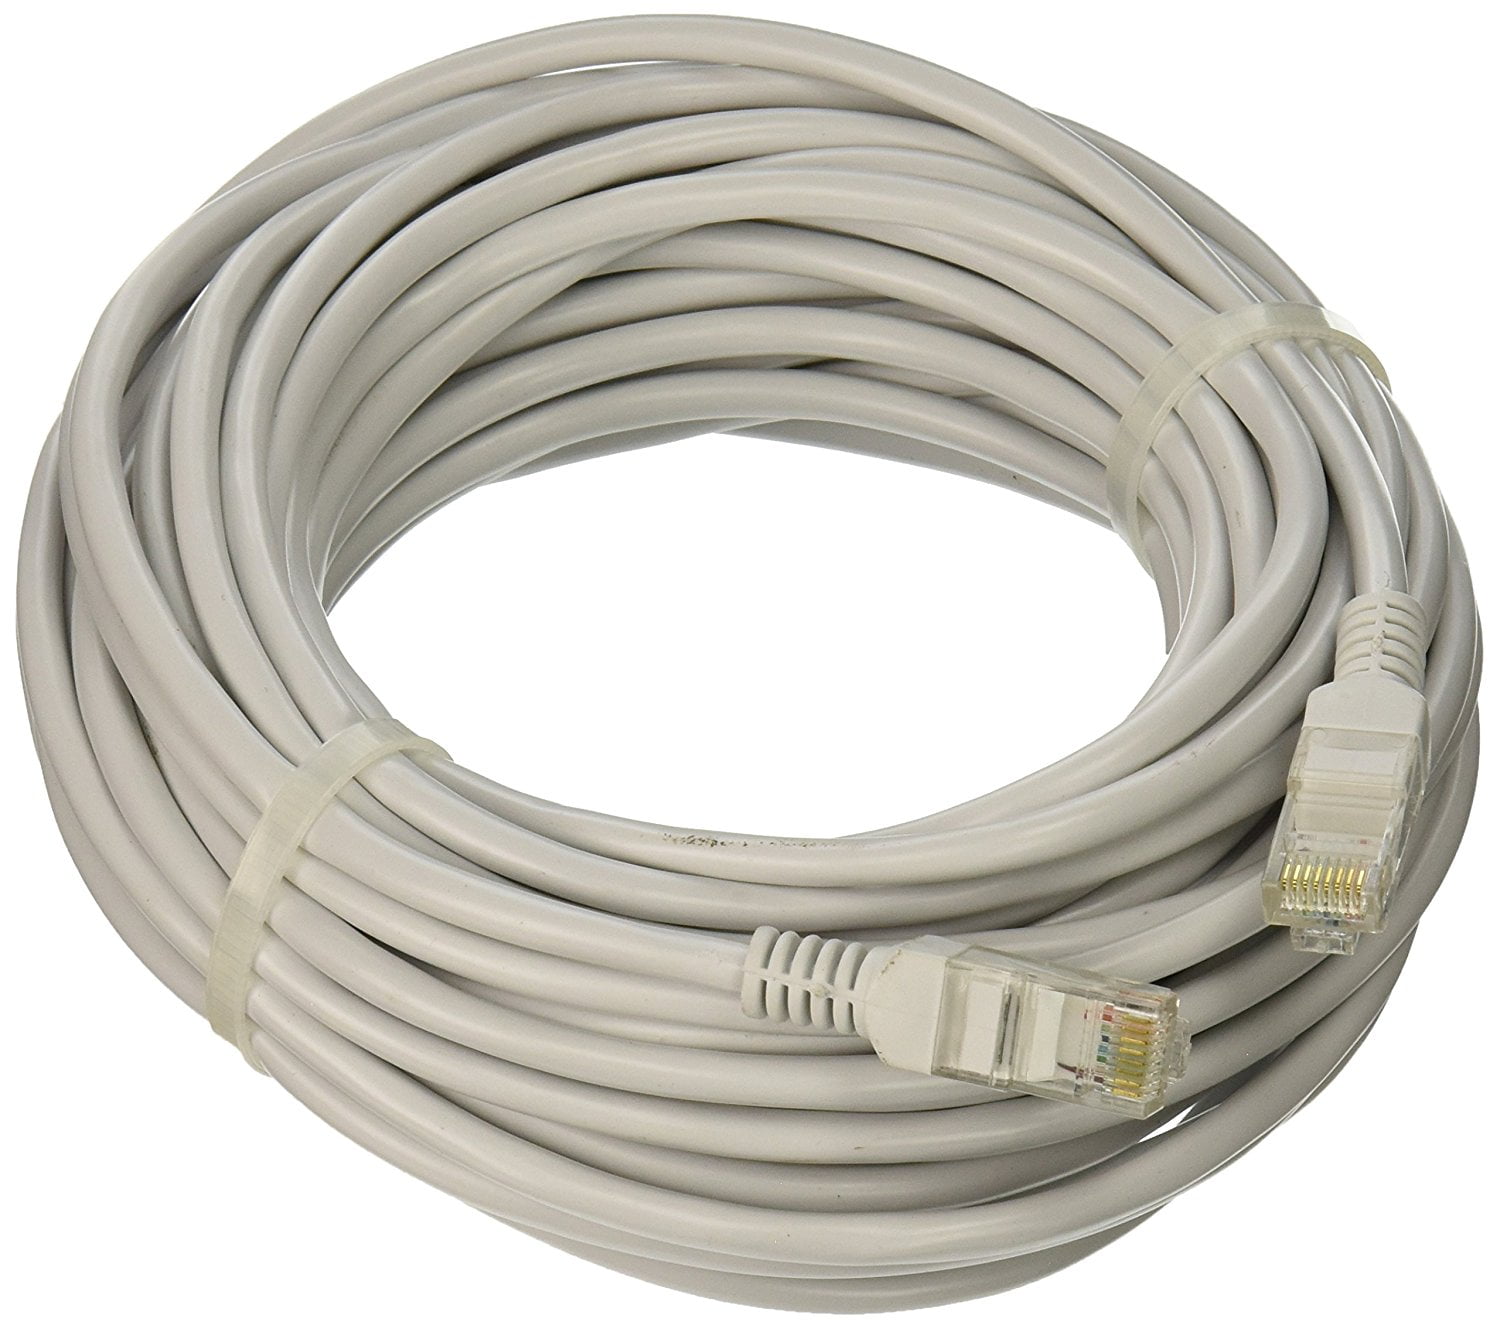 Cat 7 Ethernet Cable 50 ft - High-Speed Internet & Network LAN Patch Cable,  RJ45 Connectors - 50ft / Black - Perfect for Gaming, Streaming, and More